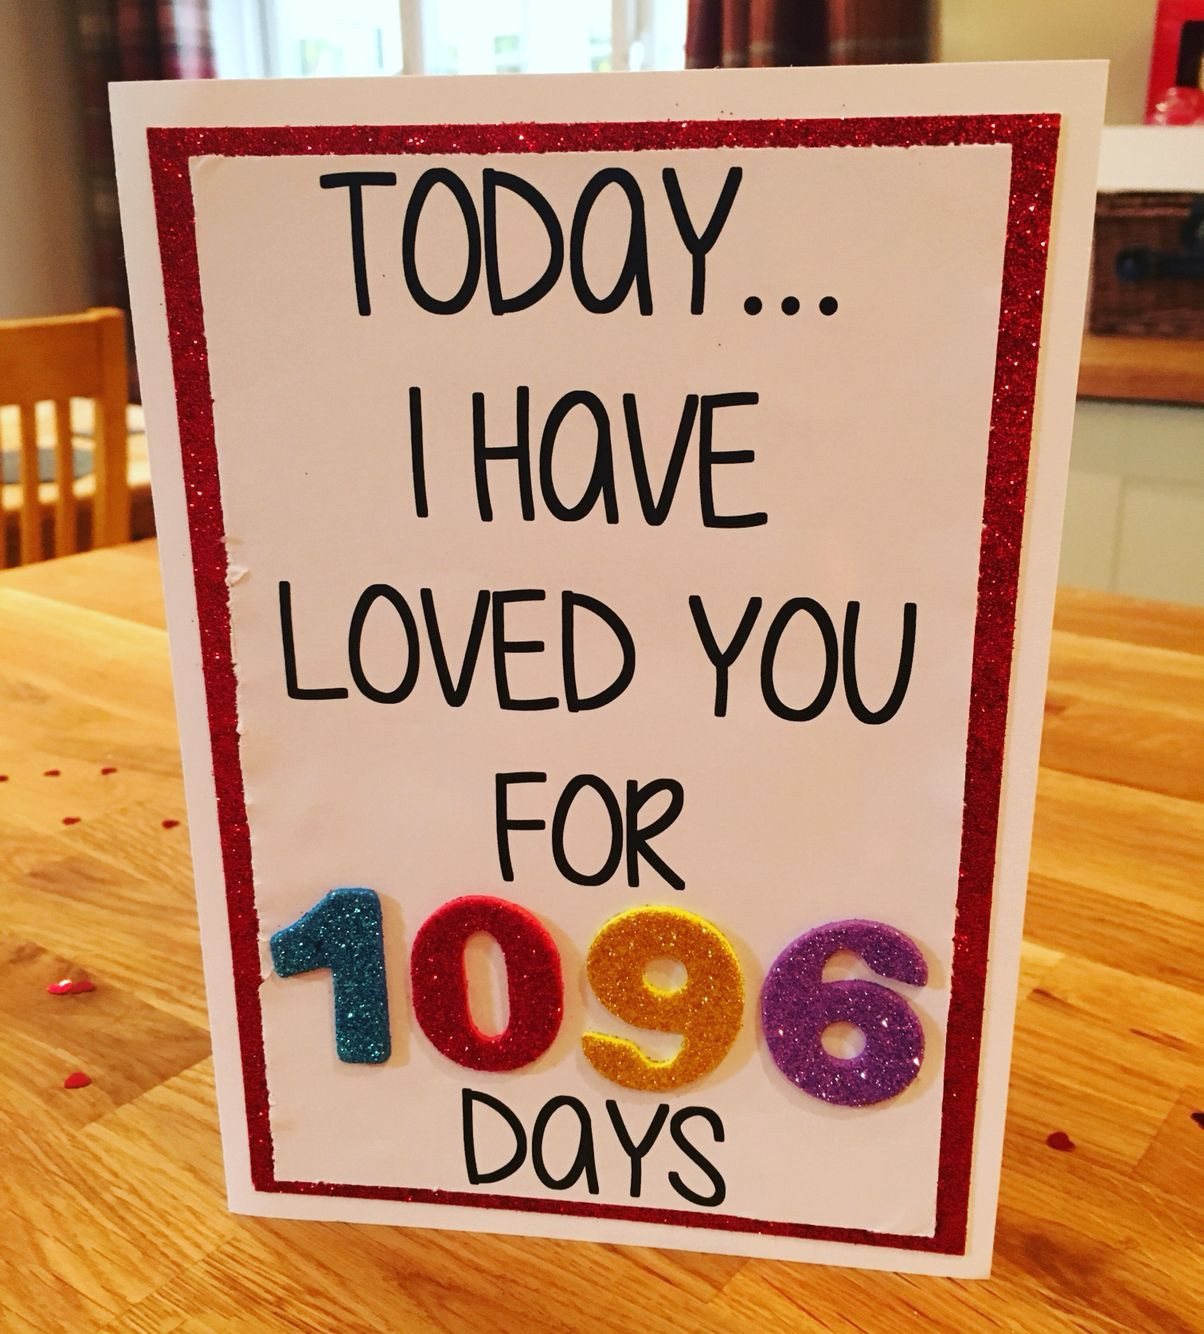 3 Year Anniversary Gift Ideas For Girlfriend
 3 year anniversary card Today I have loved you for 1096